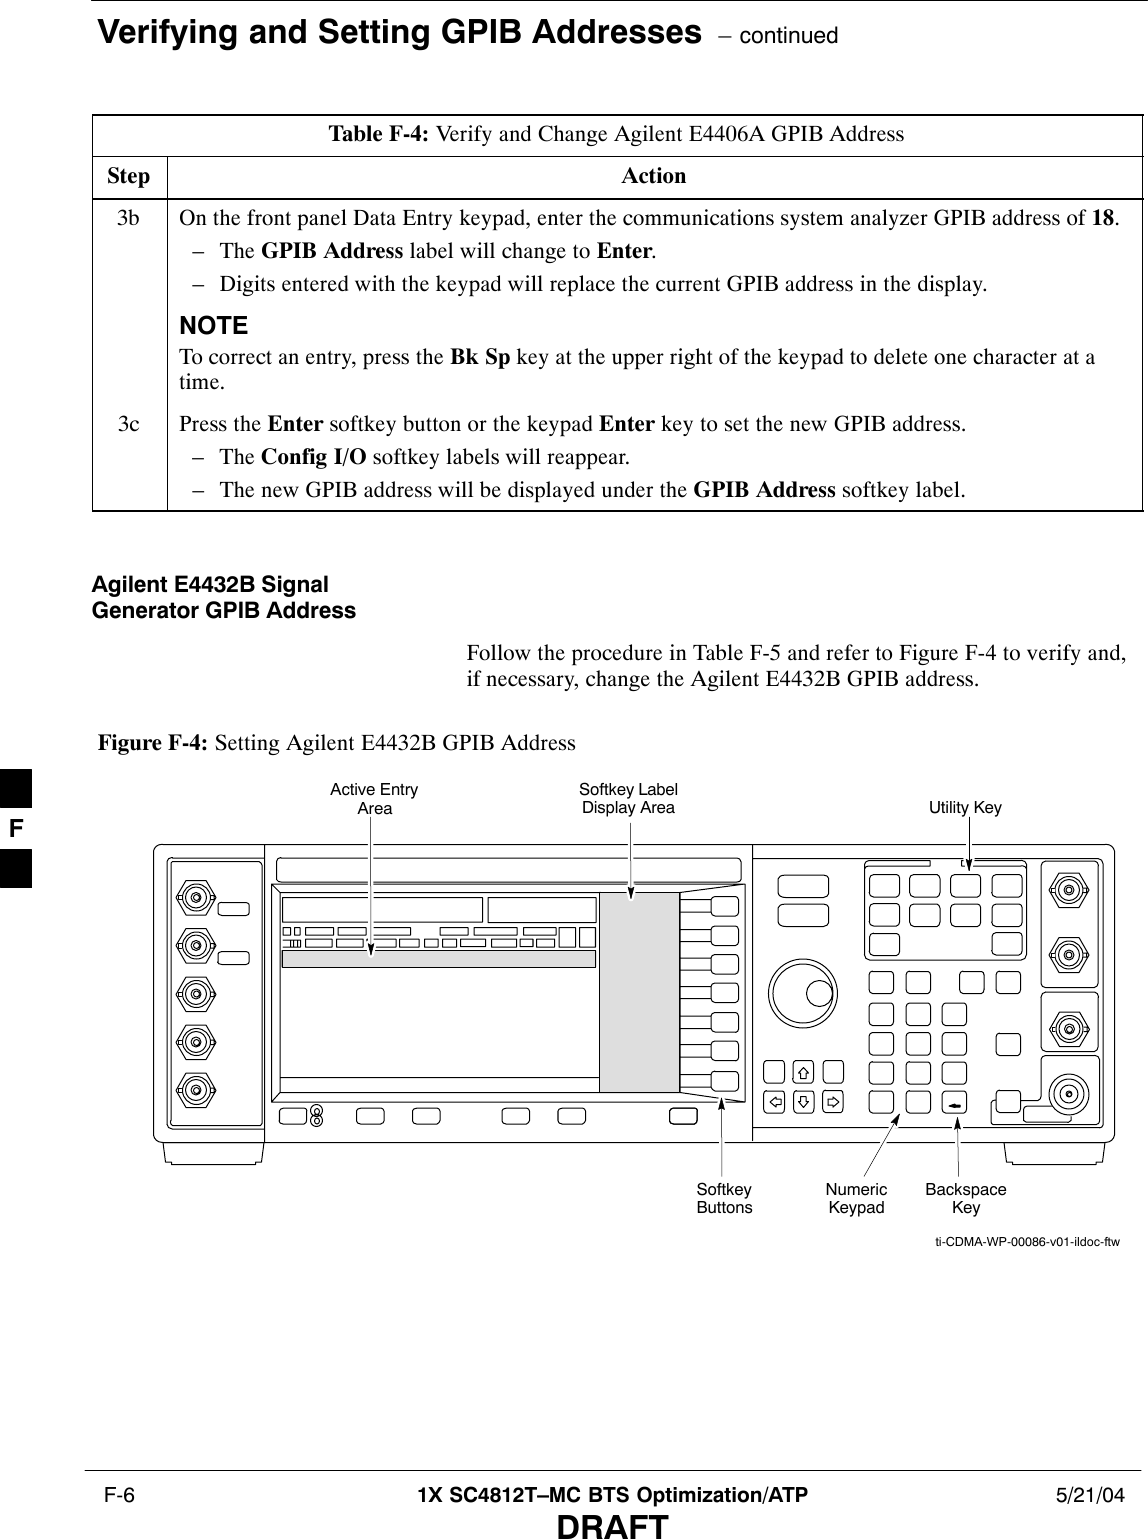 Verifying and Setting GPIB Addresses  – continued F-6 1X SC4812T–MC BTS Optimization/ATP 5/21/04DRAFTTable F-4: Verify and Change Agilent E4406A GPIB AddressStep Action3b On the front panel Data Entry keypad, enter the communications system analyzer GPIB address of 18.– The GPIB Address label will change to Enter.– Digits entered with the keypad will replace the current GPIB address in the display.NOTETo correct an entry, press the Bk Sp key at the upper right of the keypad to delete one character at atime.3c Press the Enter softkey button or the keypad Enter key to set the new GPIB address.– The Config I/O softkey labels will reappear.– The new GPIB address will be displayed under the GPIB Address softkey label. Agilent E4432B SignalGenerator GPIB AddressFollow the procedure in Table F-5 and refer to Figure F-4 to verify and,if necessary, change the Agilent E4432B GPIB address.Figure F-4: Setting Agilent E4432B GPIB AddressNumericKeypadSoftkeyButtonsSoftkey LabelDisplay AreaActive EntryAreaBackspaceKeyUtility Keyti-CDMA-WP-00086-v01-ildoc-ftwF